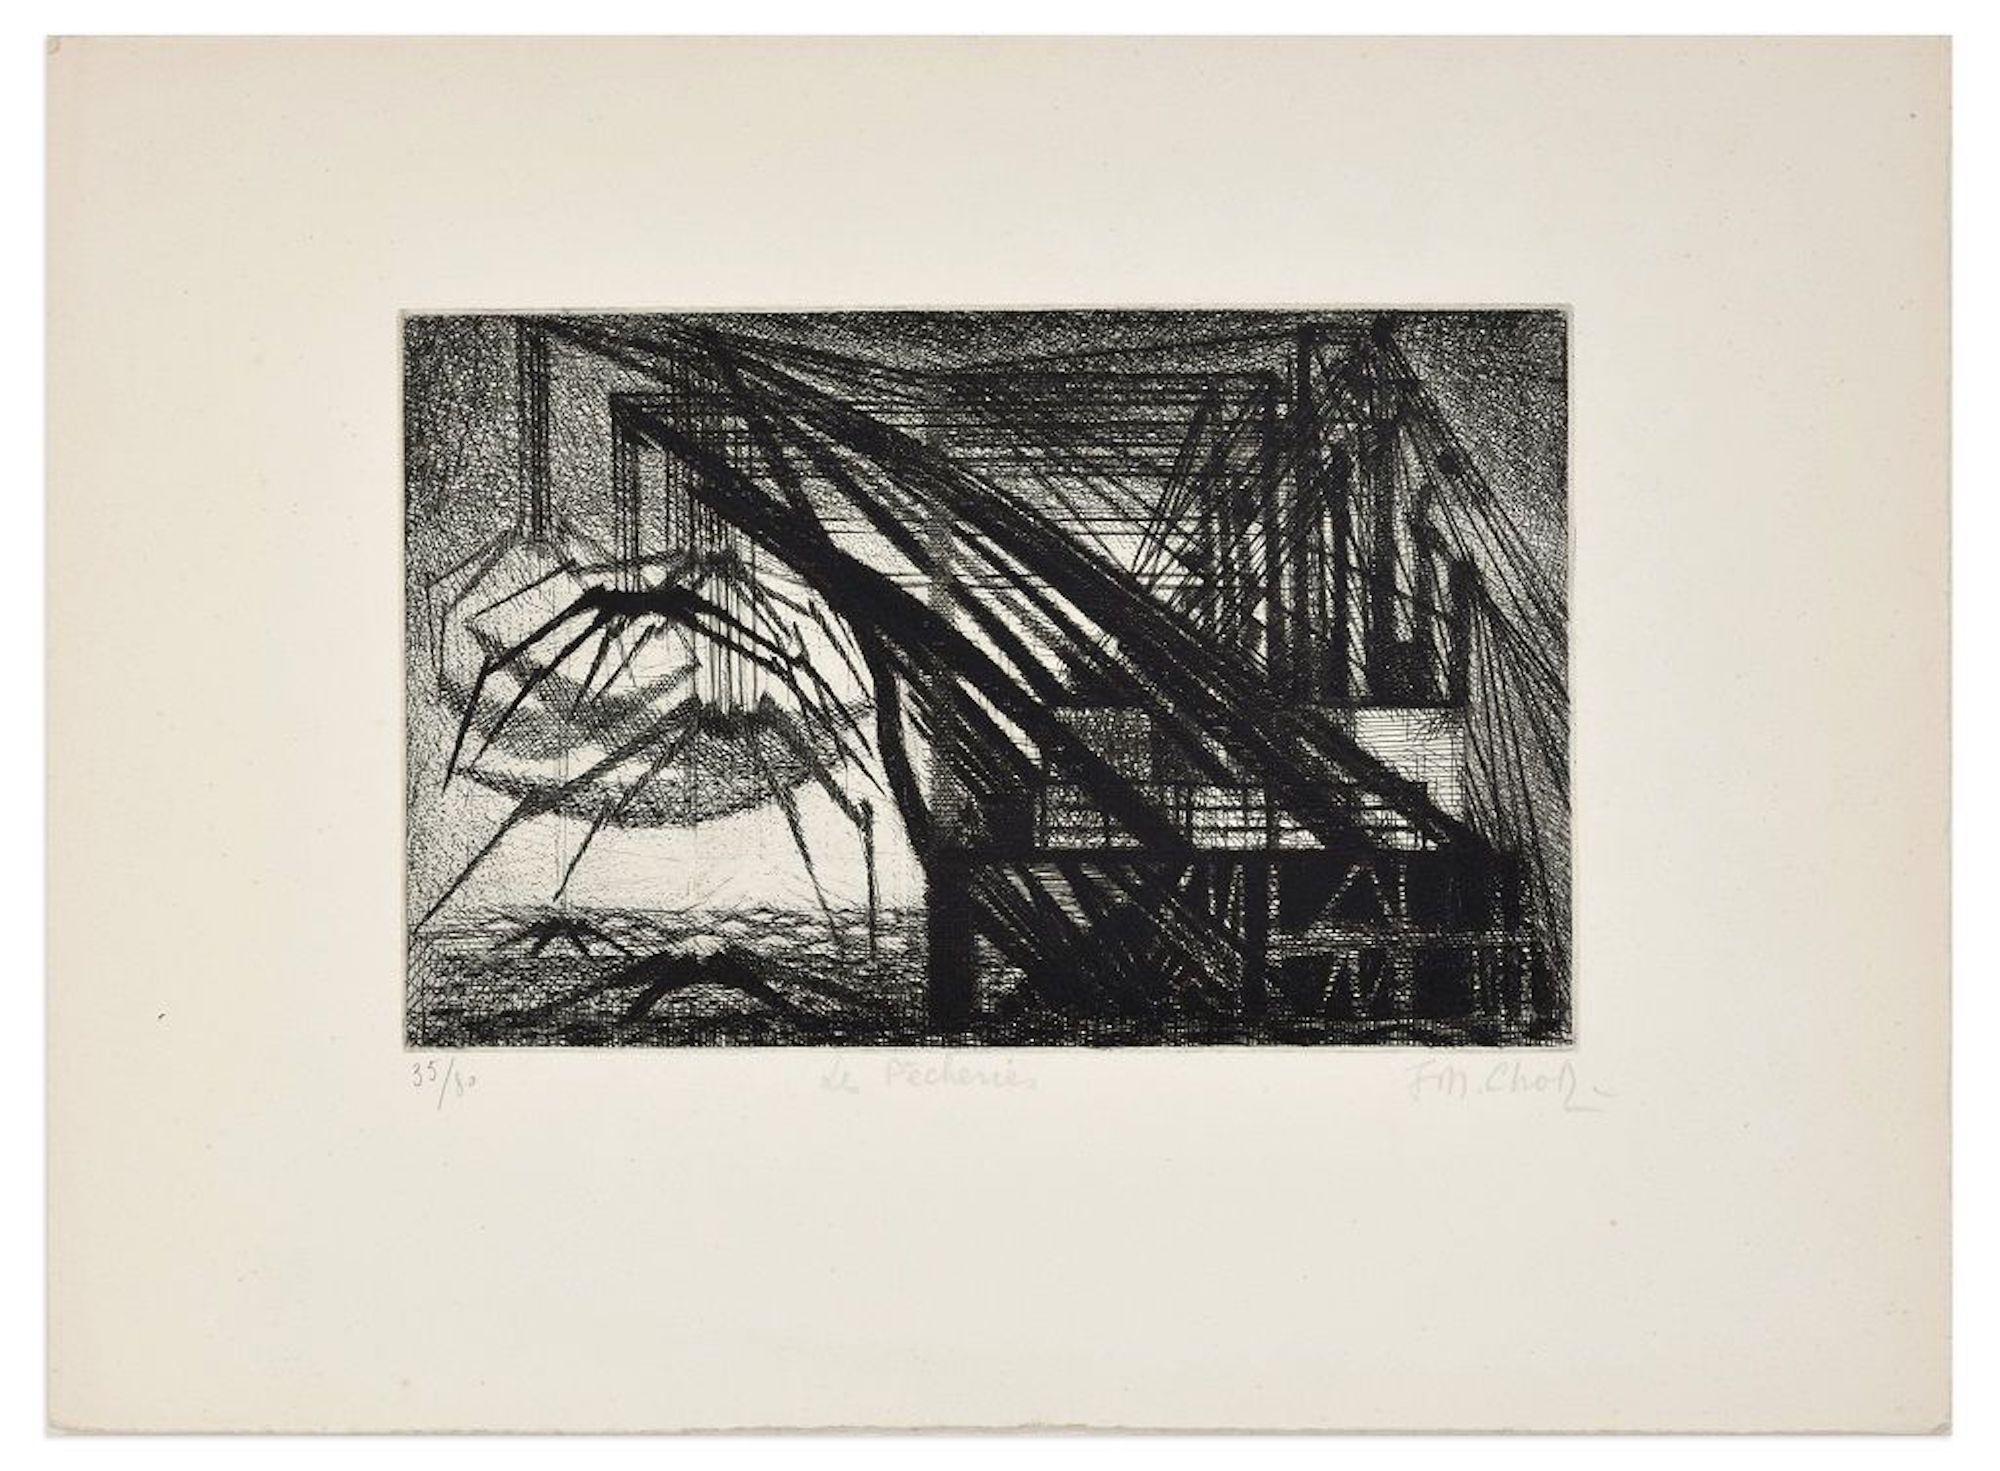 Les Pecheries is an original work realized by Maurice Chot-Plassot in the half of the XX Century. 

Original etching on paper. Hand-signed in pencil on the lower right corner. Titled in pencil on the lower central side. Numbered on the lower left